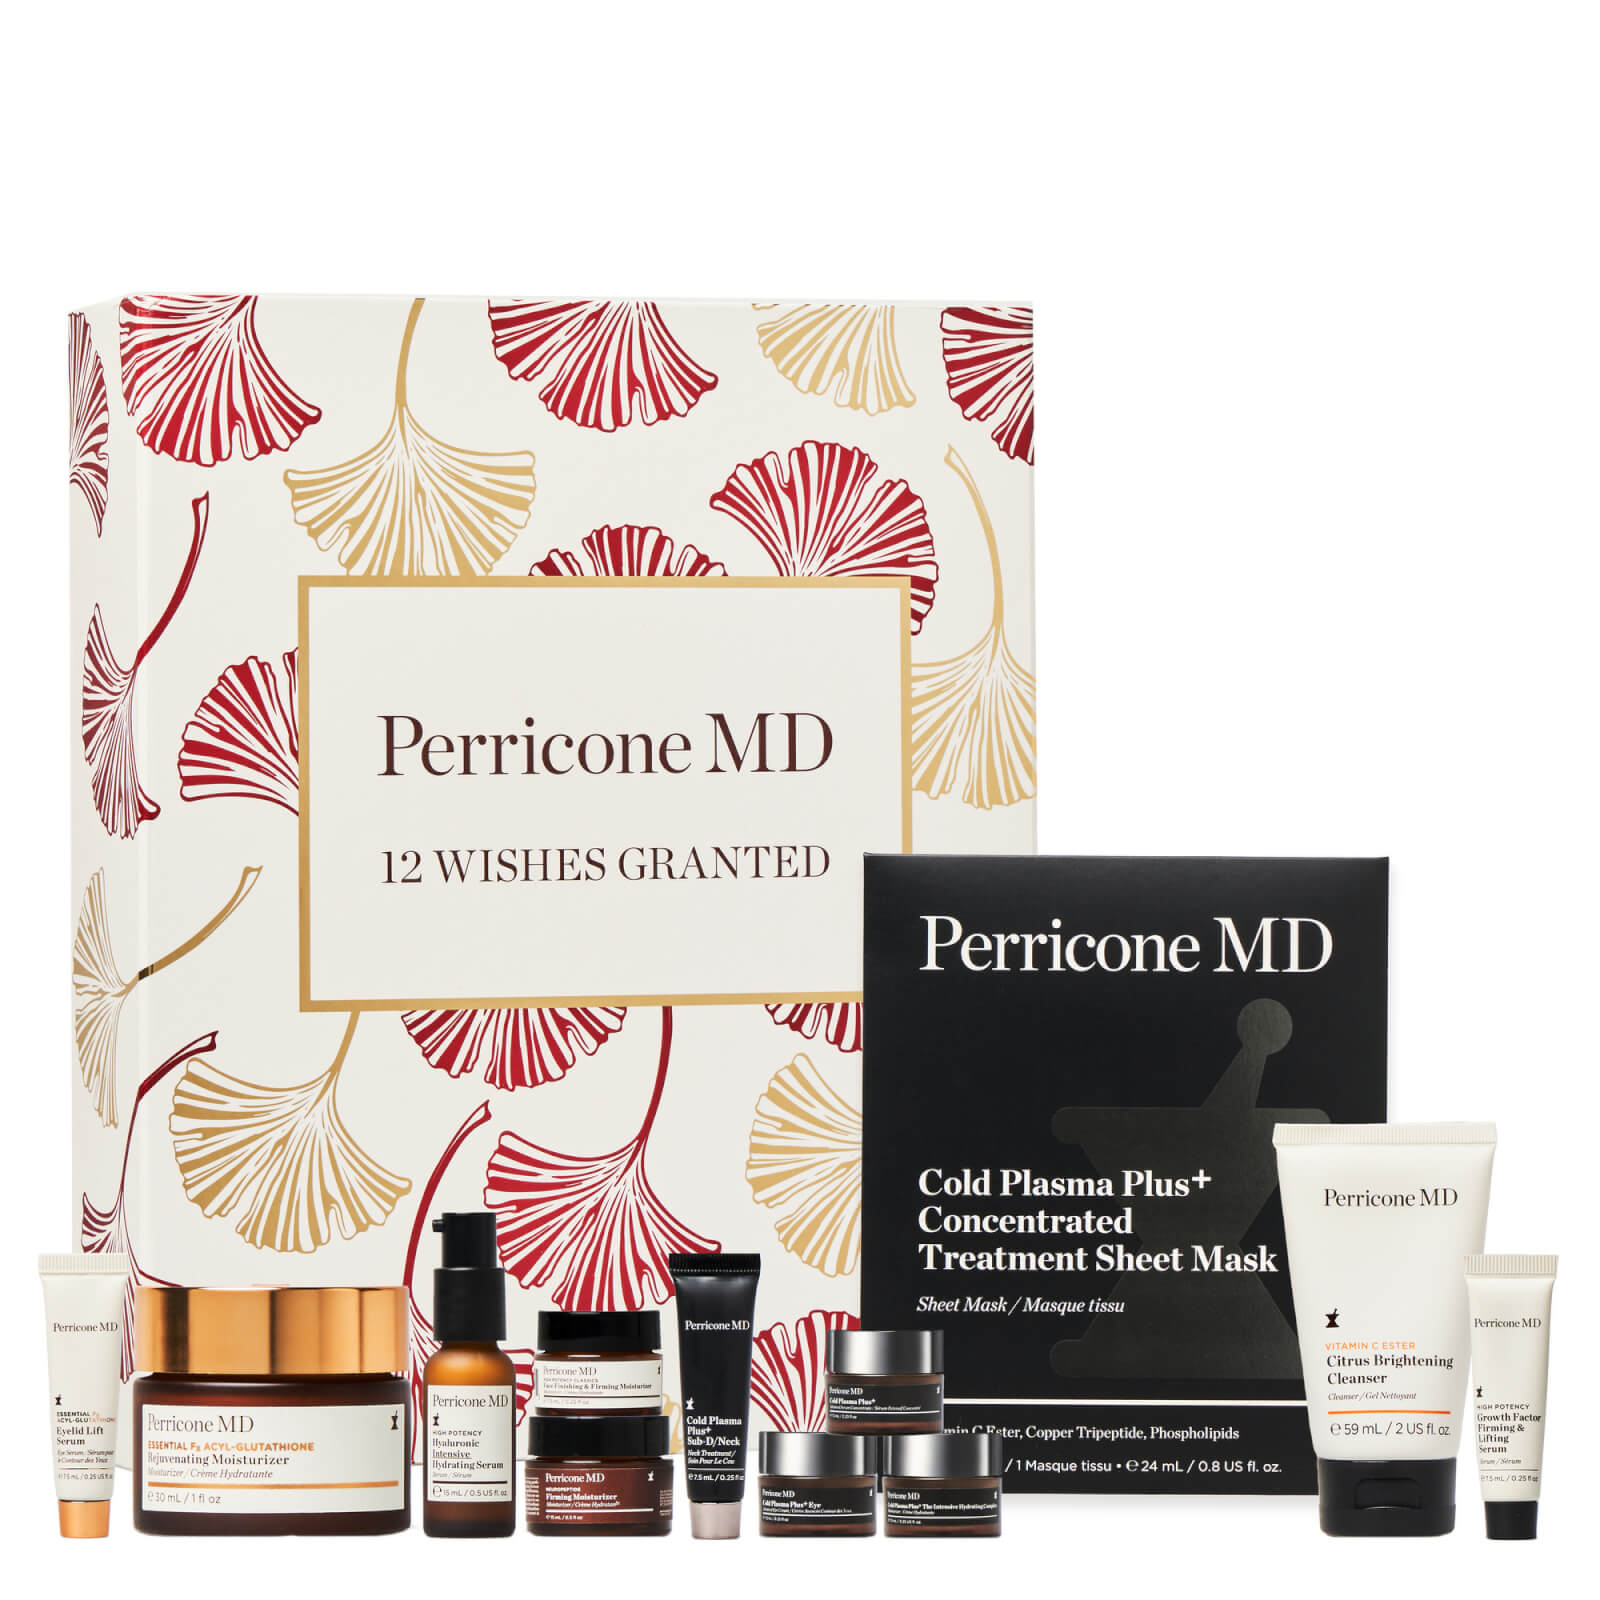 Perricone Md 12 Wishes Granted